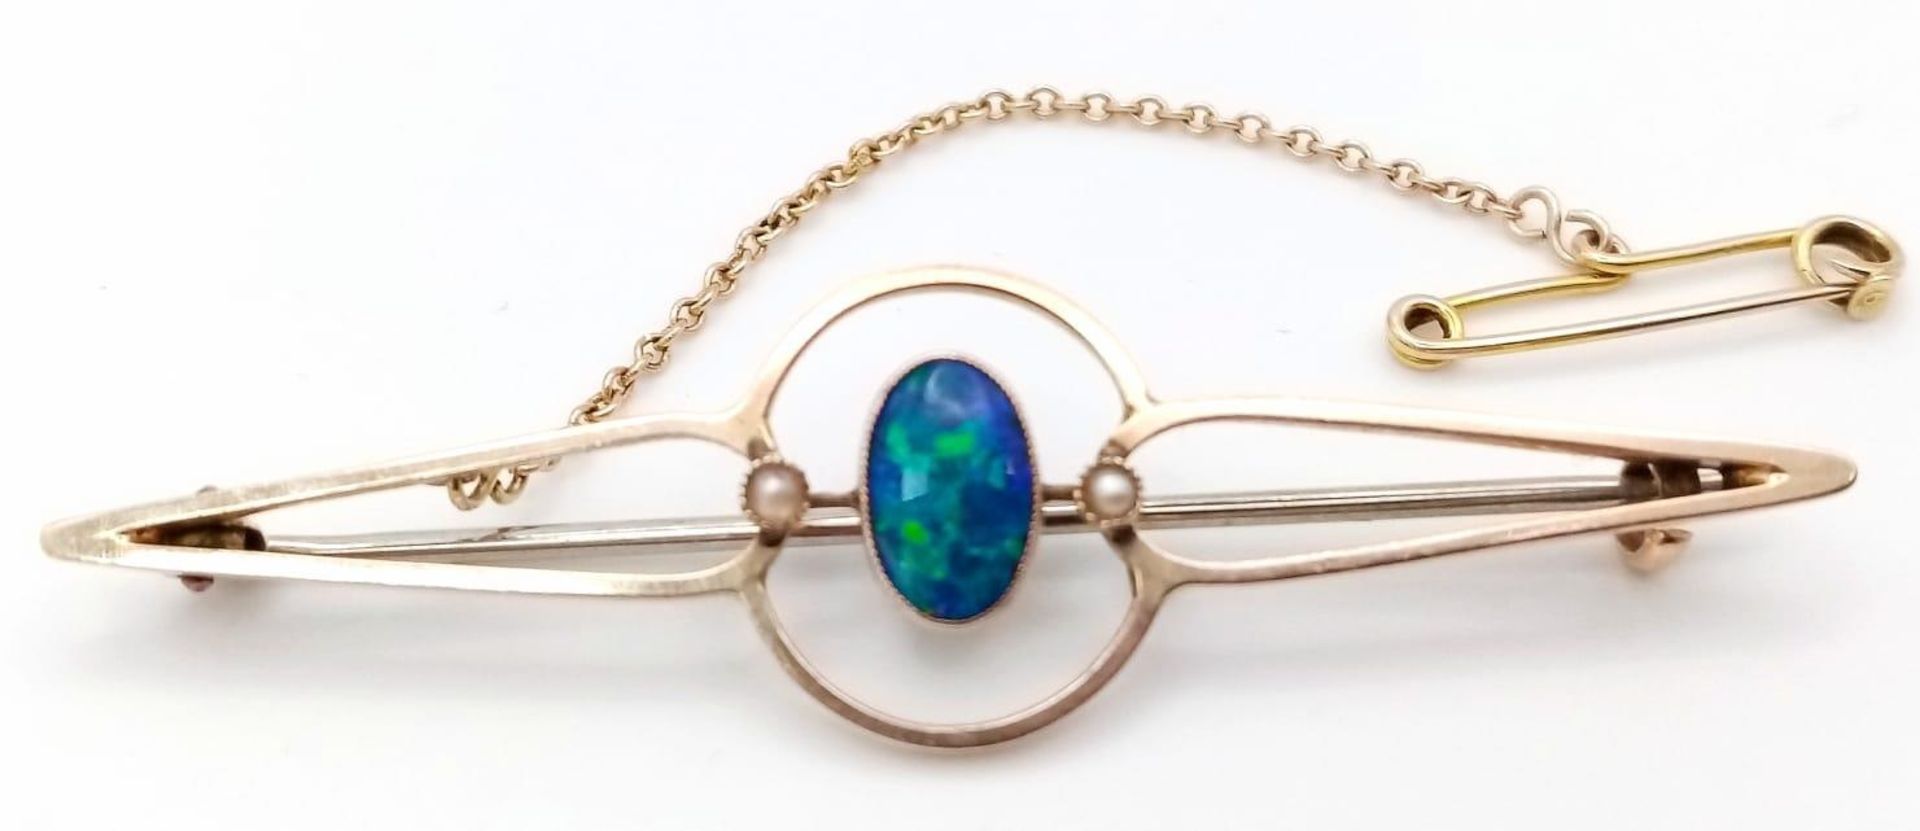 An Antique Australian Black Opal Bar Brooch. 6cm. Pin has been replaced. Fitted box. 3.8g - Image 2 of 4